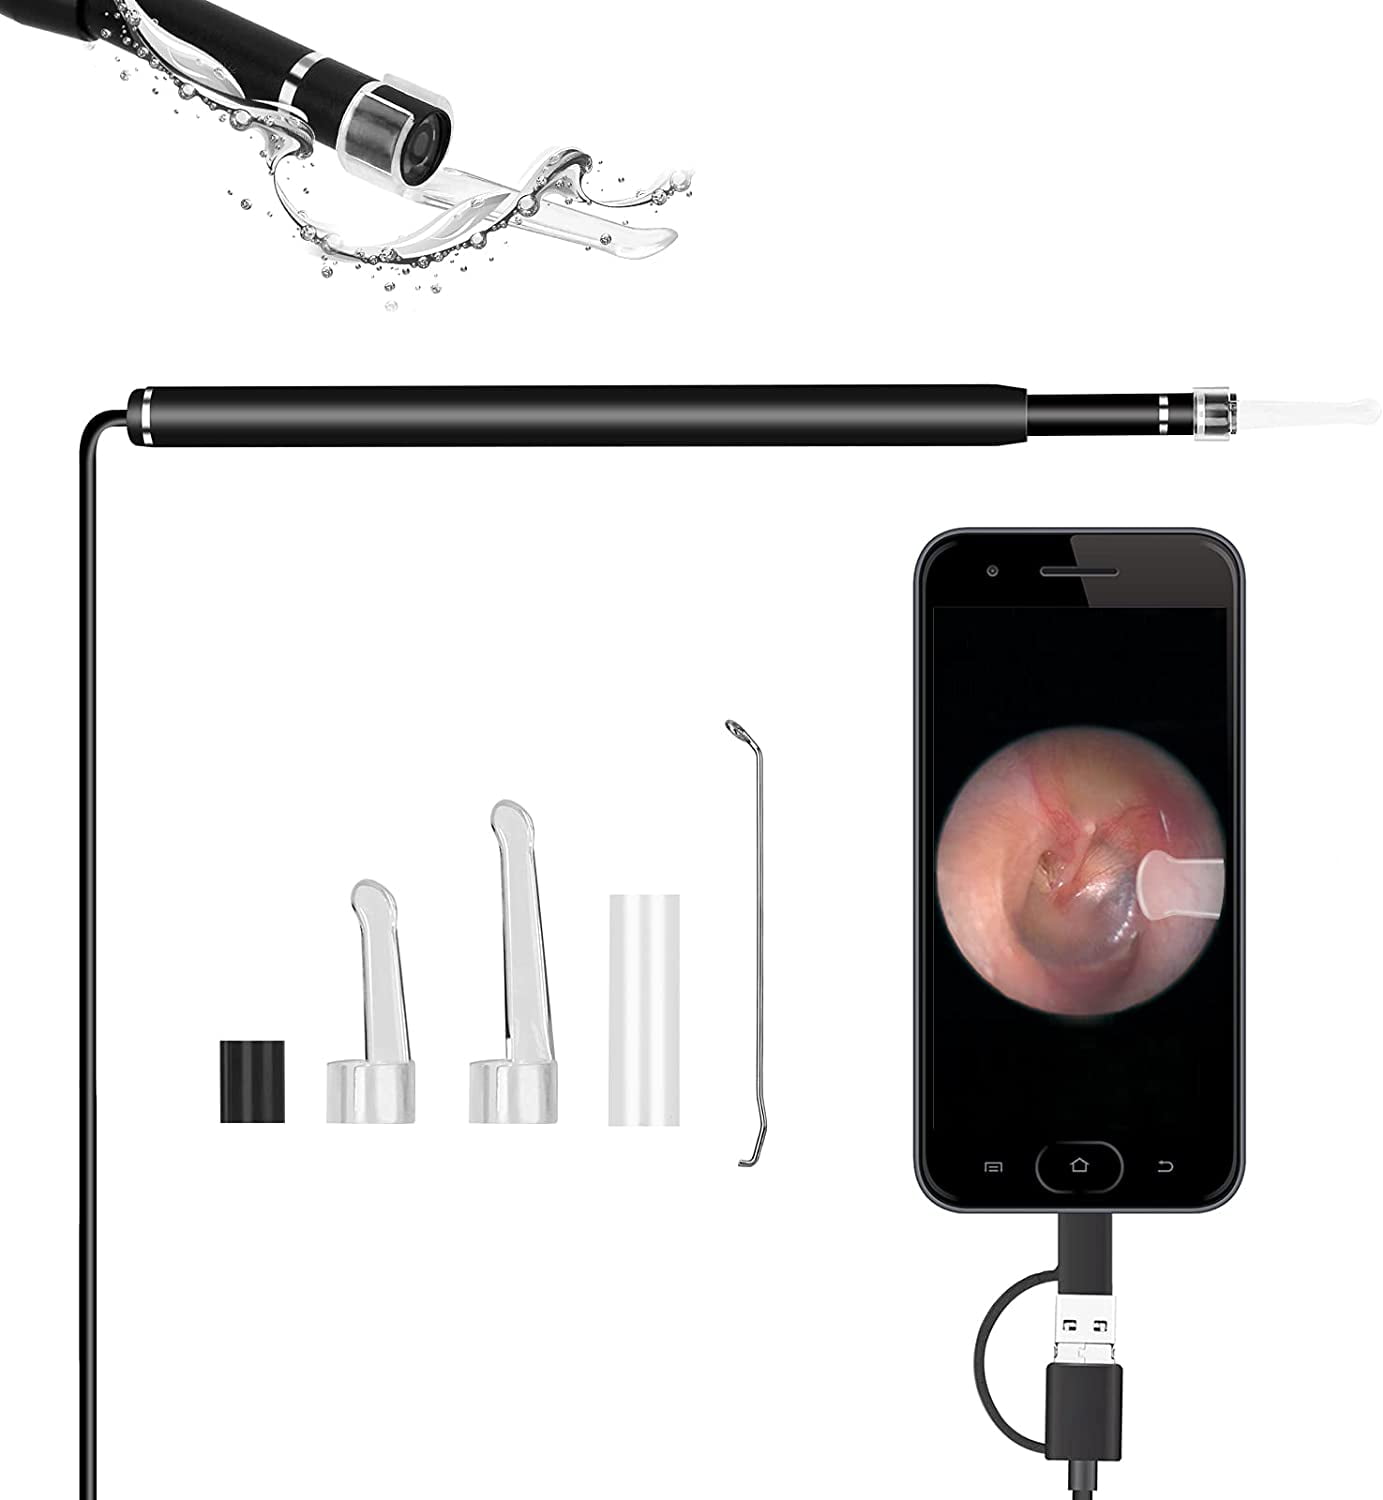 Wireless Ear Cleaning Endoscope Ear Otoscope Ear Wax Remover Tool with 6 LED Lights for iPhone iPad iOS Android Cell Phone Tablet PC 1.3MP HD WiFi Ear Scope Inspection Waterproof Ear Camera 